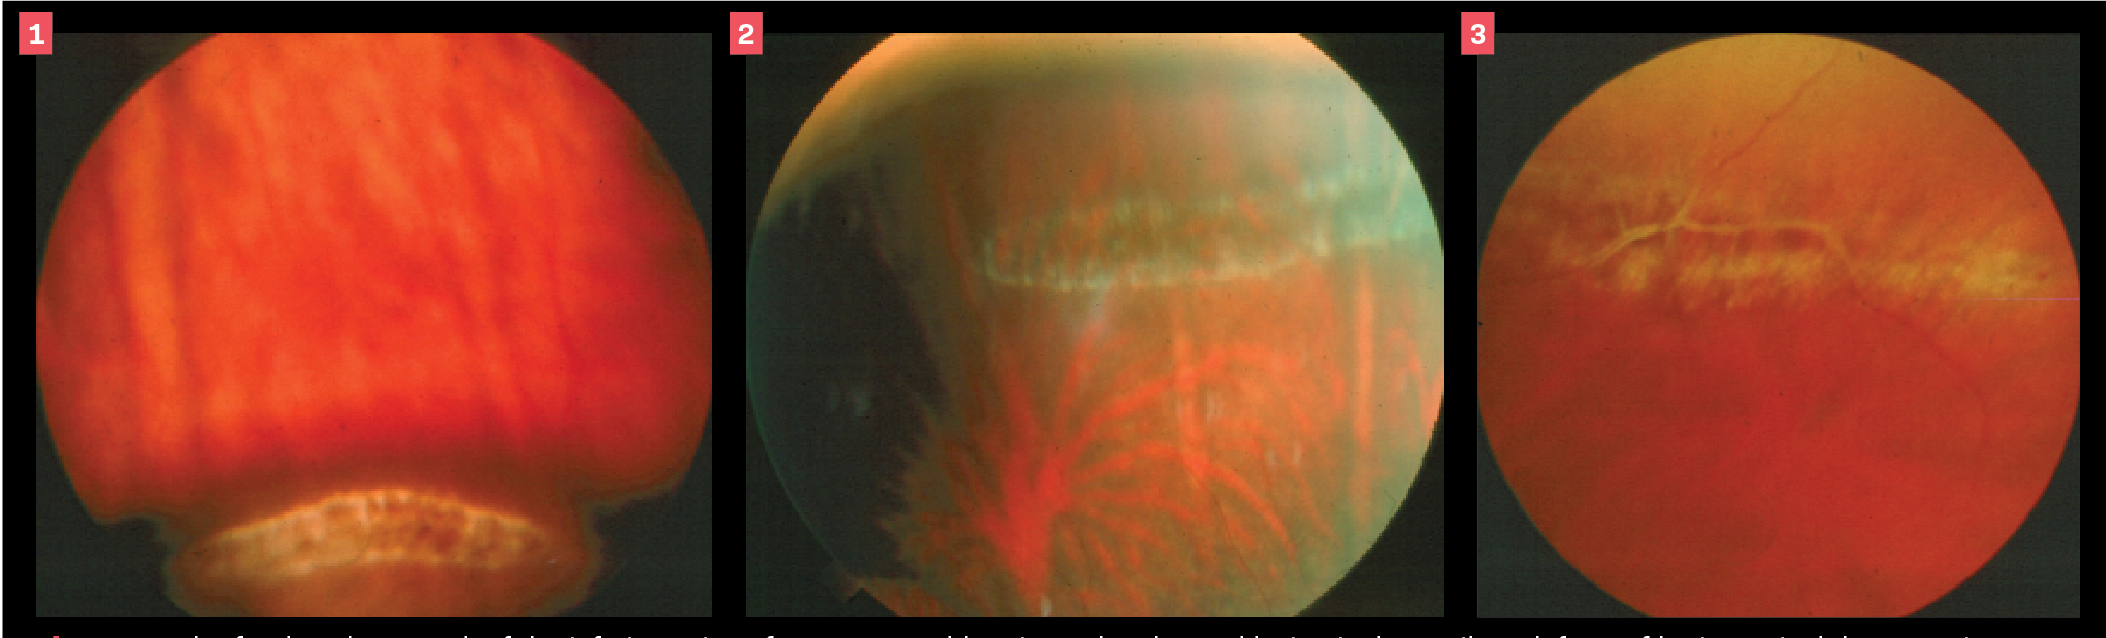 Figure 1. Color fundus photograph of the inferior retina of an 11-year-old patient. The elevated lesion is the snail-track form of lattice retinal degeneration on the prominence of a scleral indenter. The railroad-track feature at the left of the lesion is a short ciliary nerve.

Figure 2. Color fundus photograph of the superior retina of a 30-year-old patient. This another example of the snail-track form of lattice retinal degeneration. The vortex vein ampulla below the lesion shows that it is about 2 DD anterior. 

Figure 3. Color fundus photograph of the superior retina of a 65-year-old patient. This another an example of lattice retinal degeneration. The appearance of a whitened retinal vessel representing the vitreous adherence within the lesion. 

(Images courtesy of Leo Semes, OD)